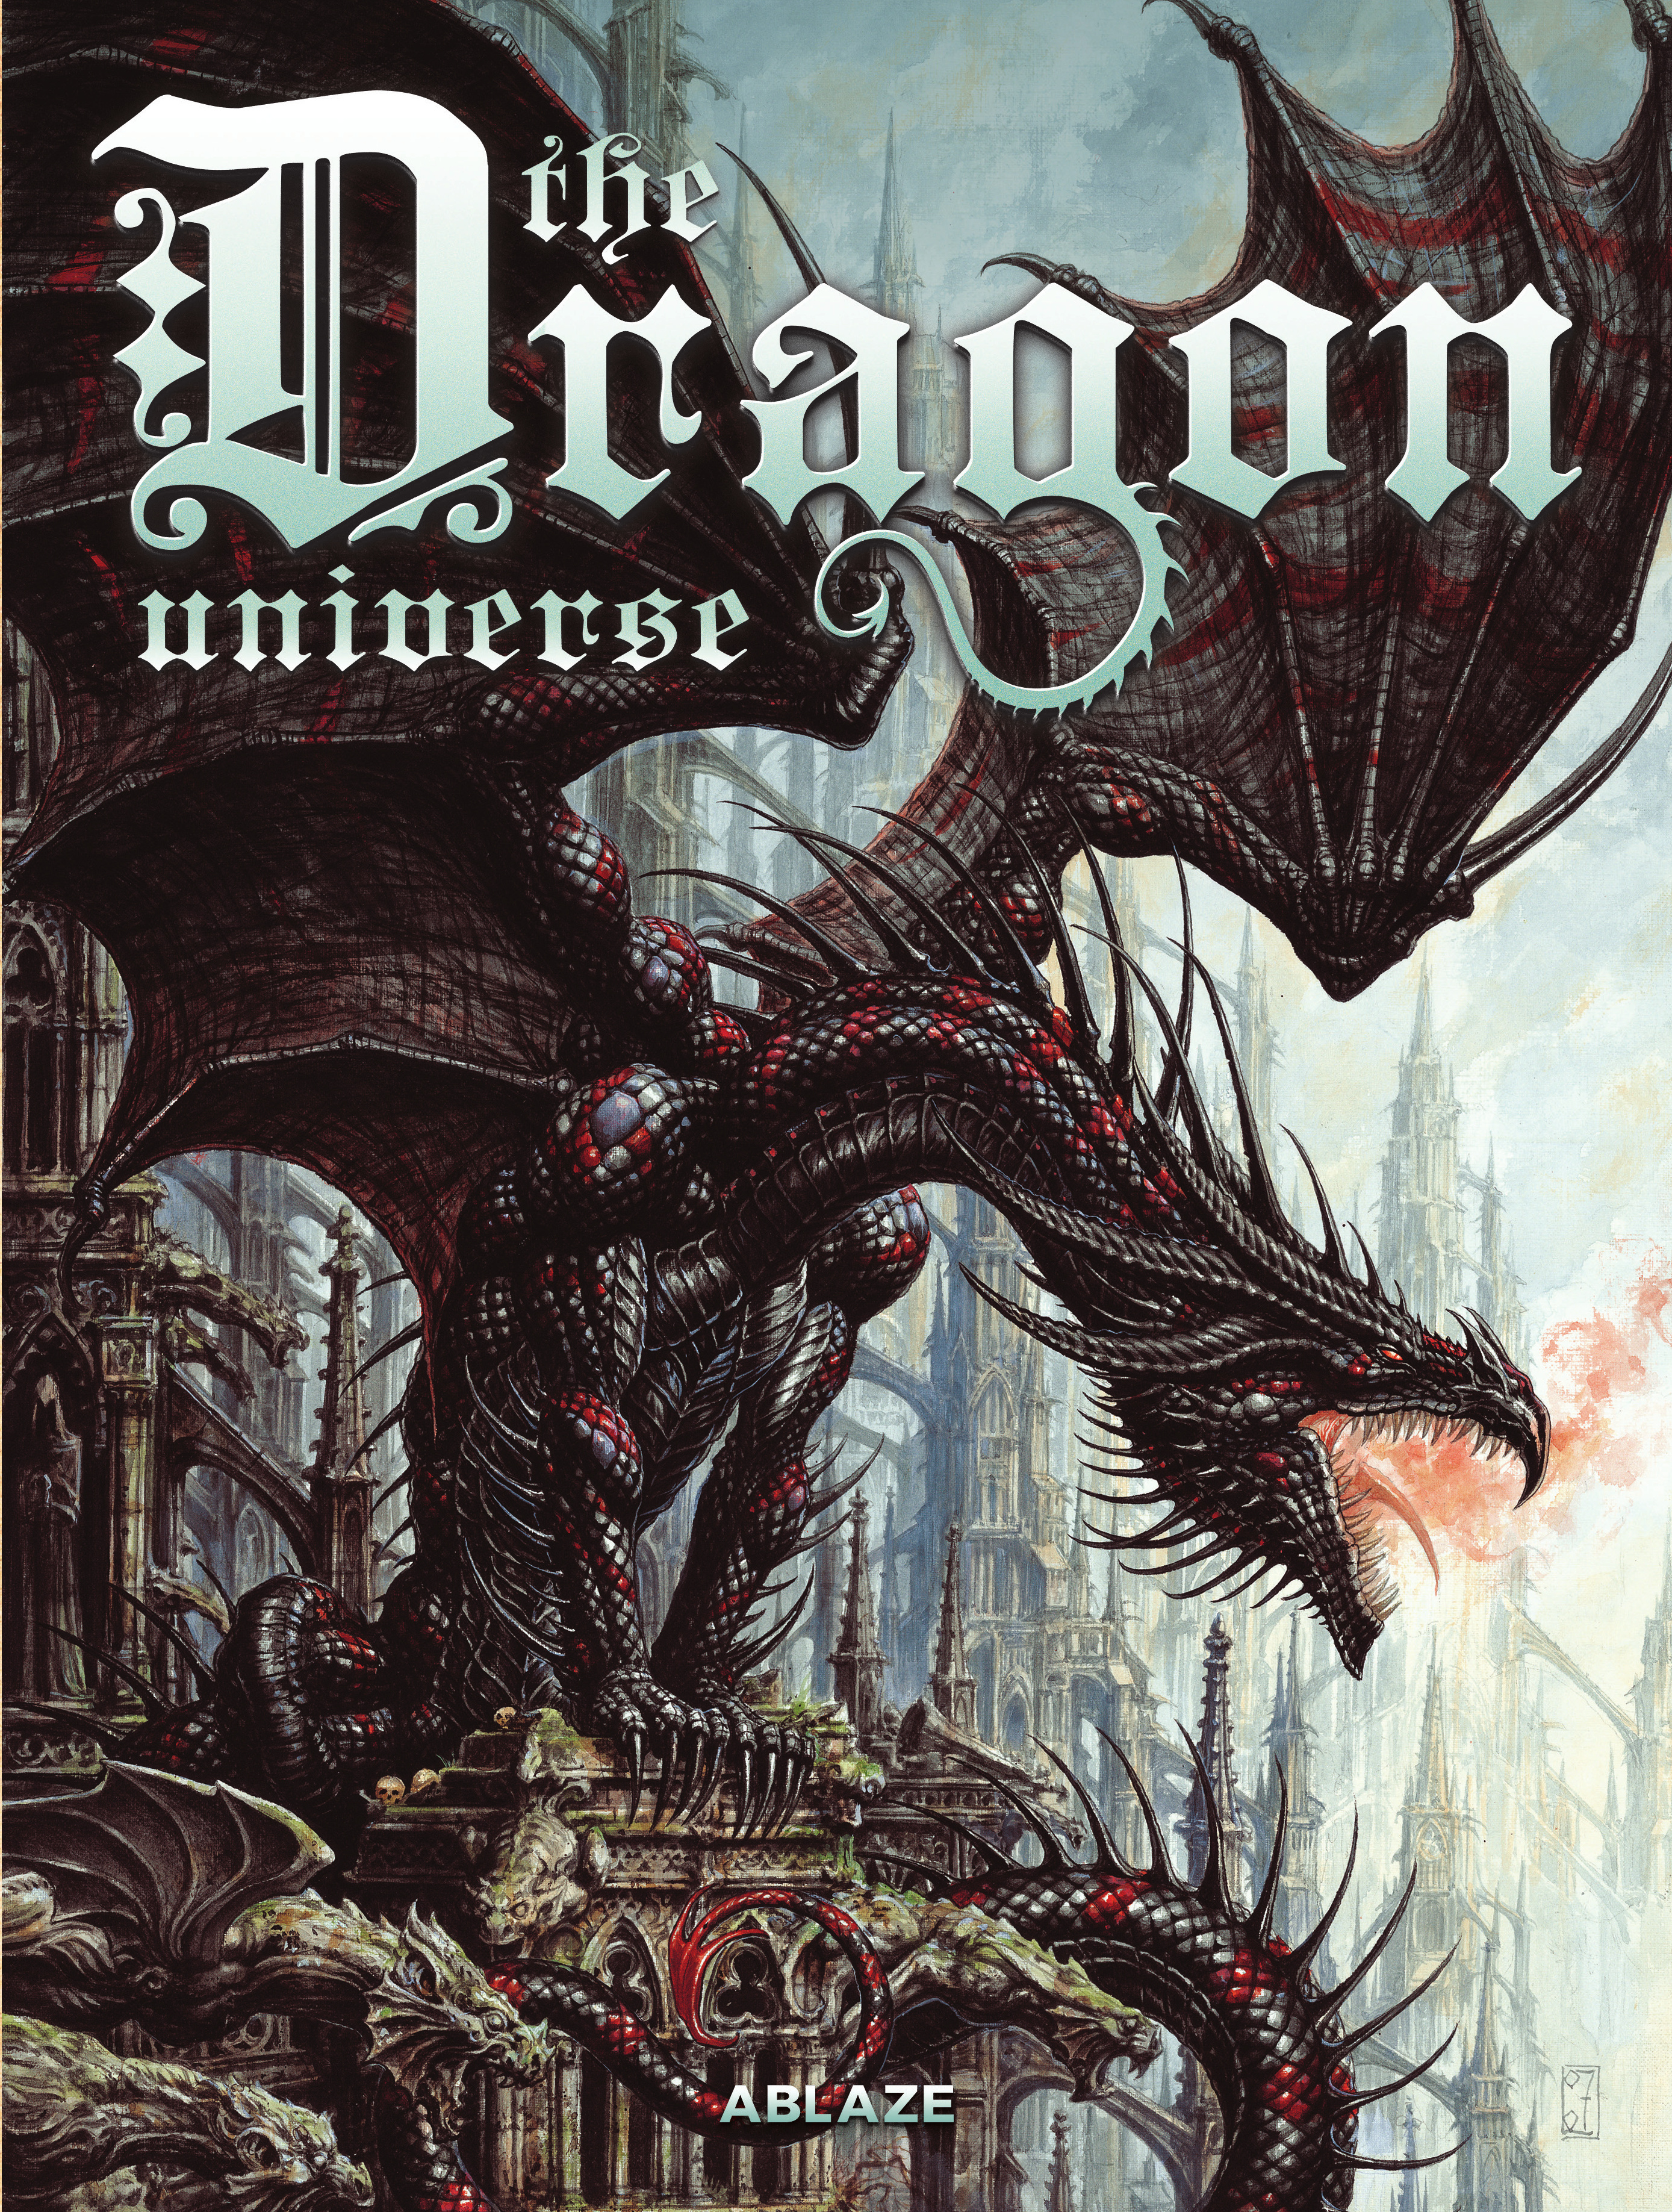 Read online The Dragon Universe comic -  Issue # TPB (Part 1) - 1